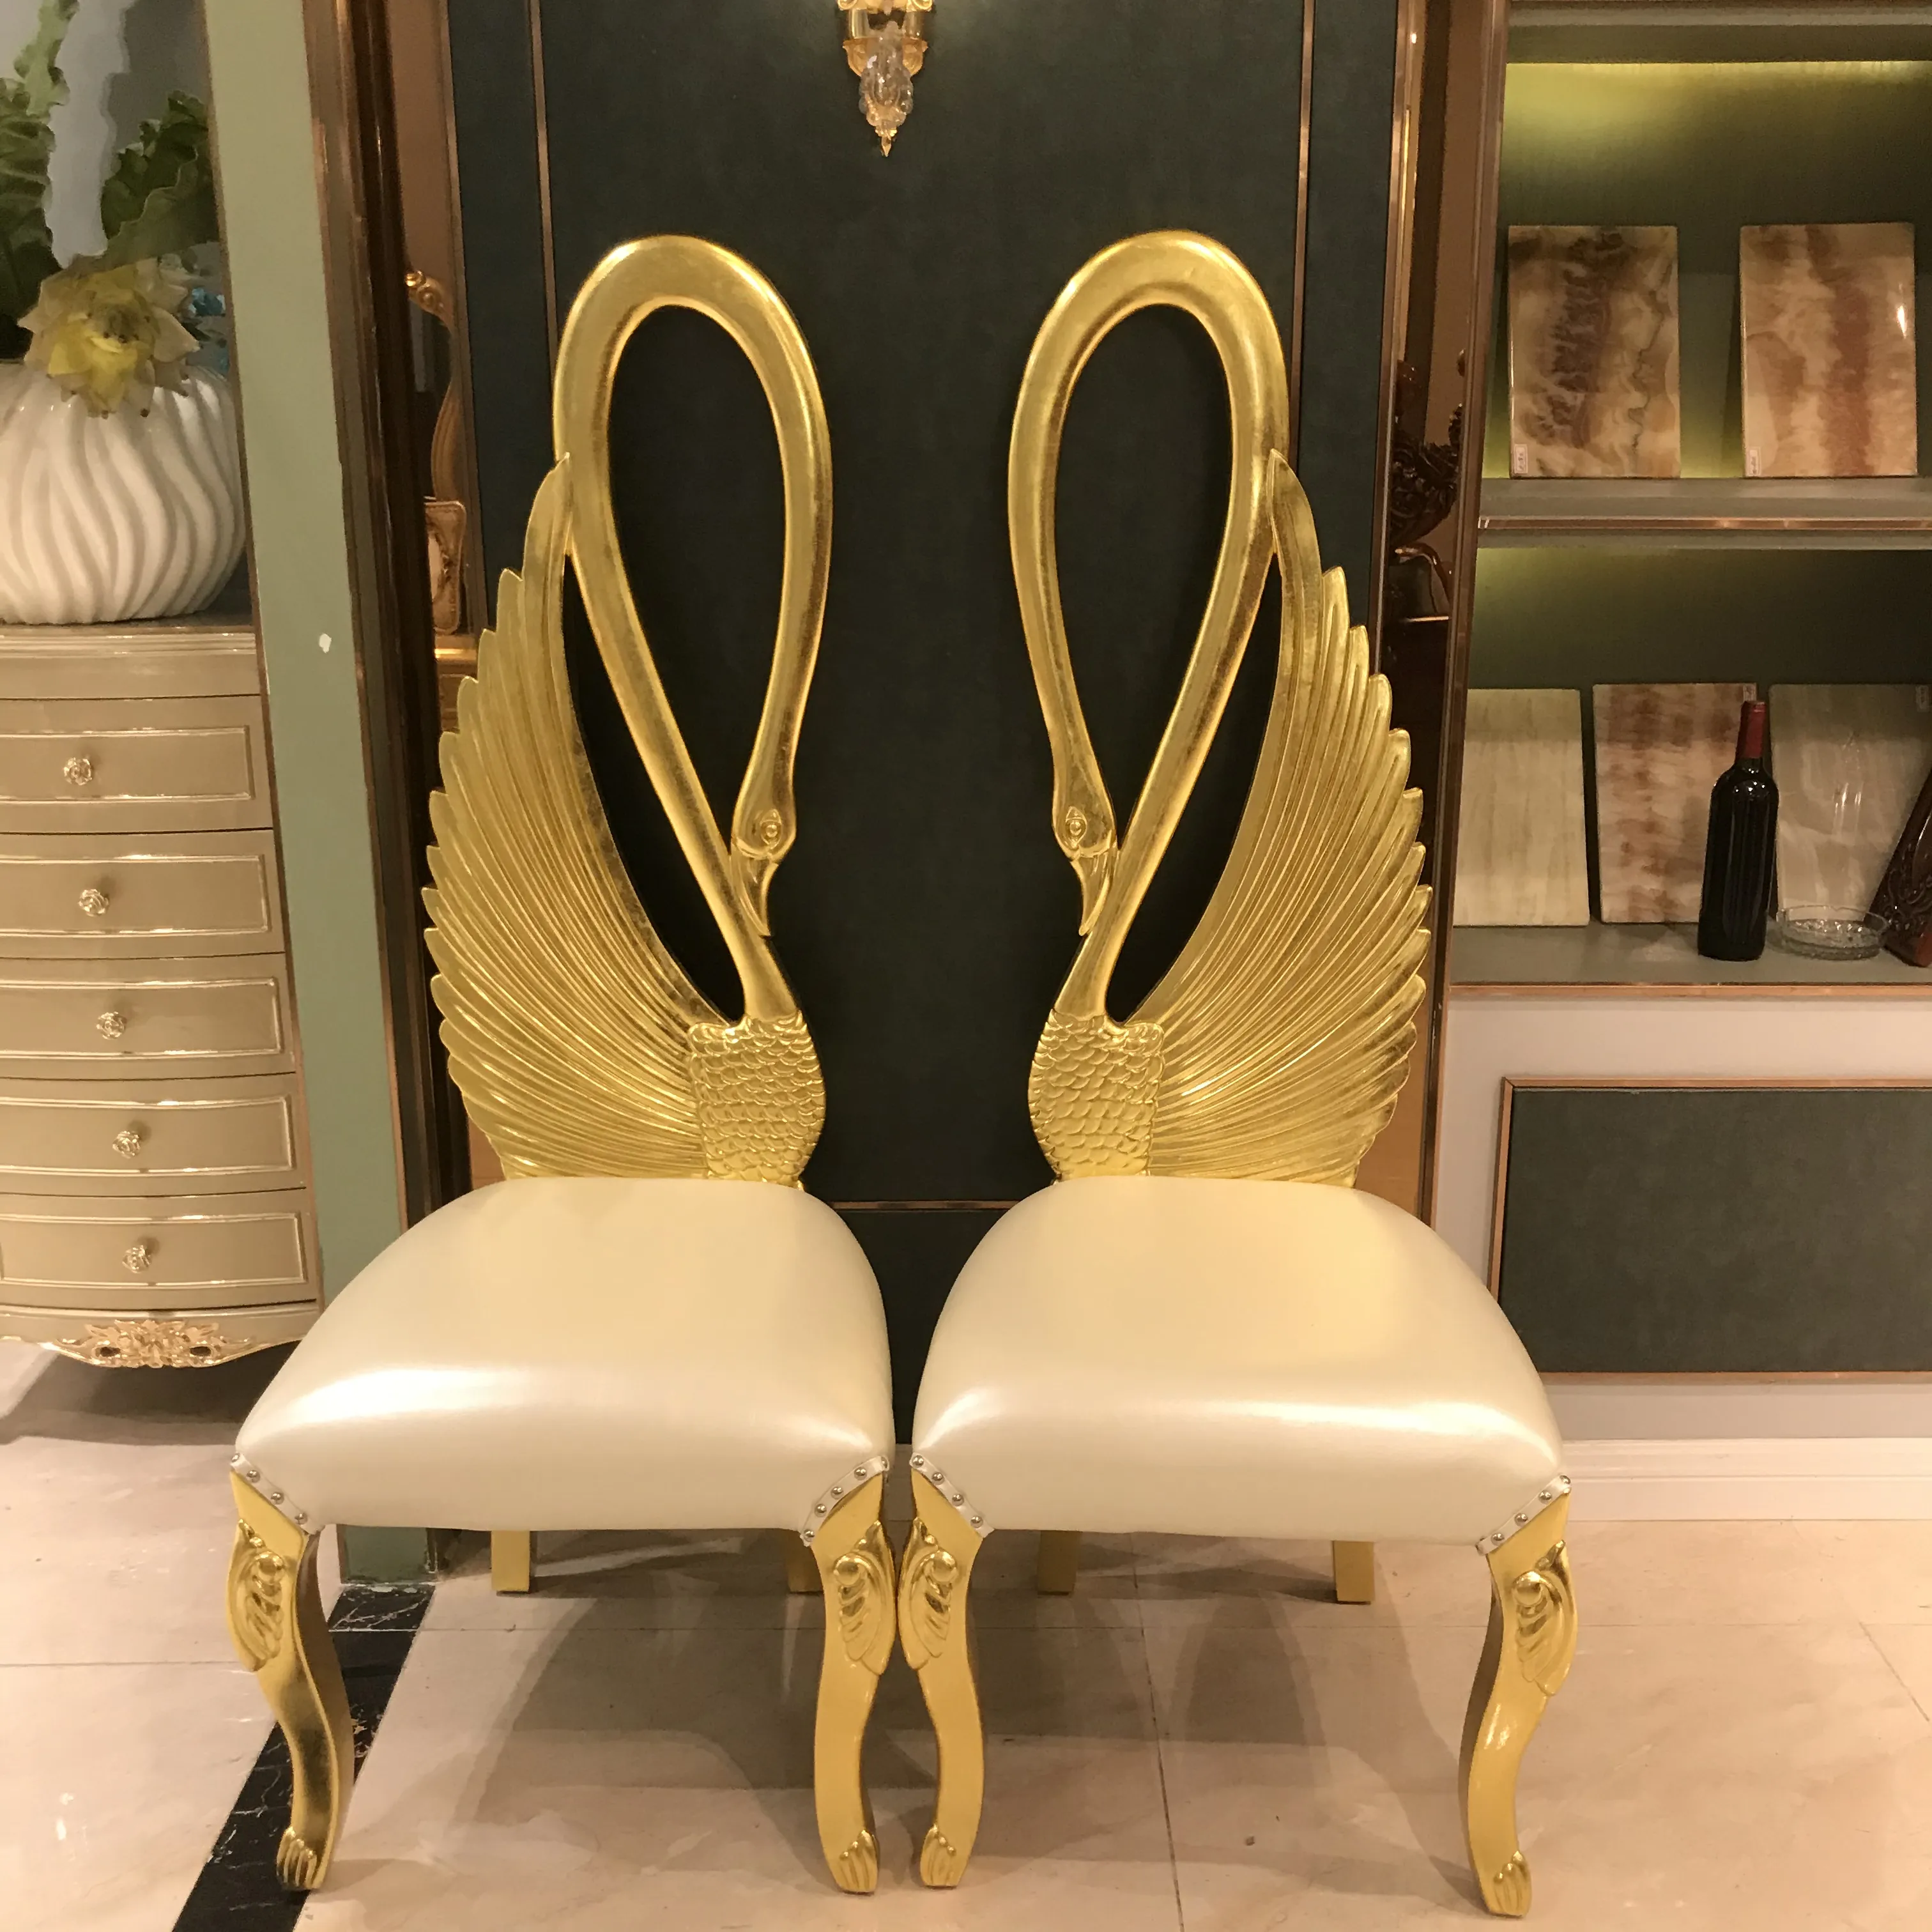 Royal Luxury Party Gold Thrown Chairs High Back Swan Love Seats Events King and Queen Throne Wedding Chair